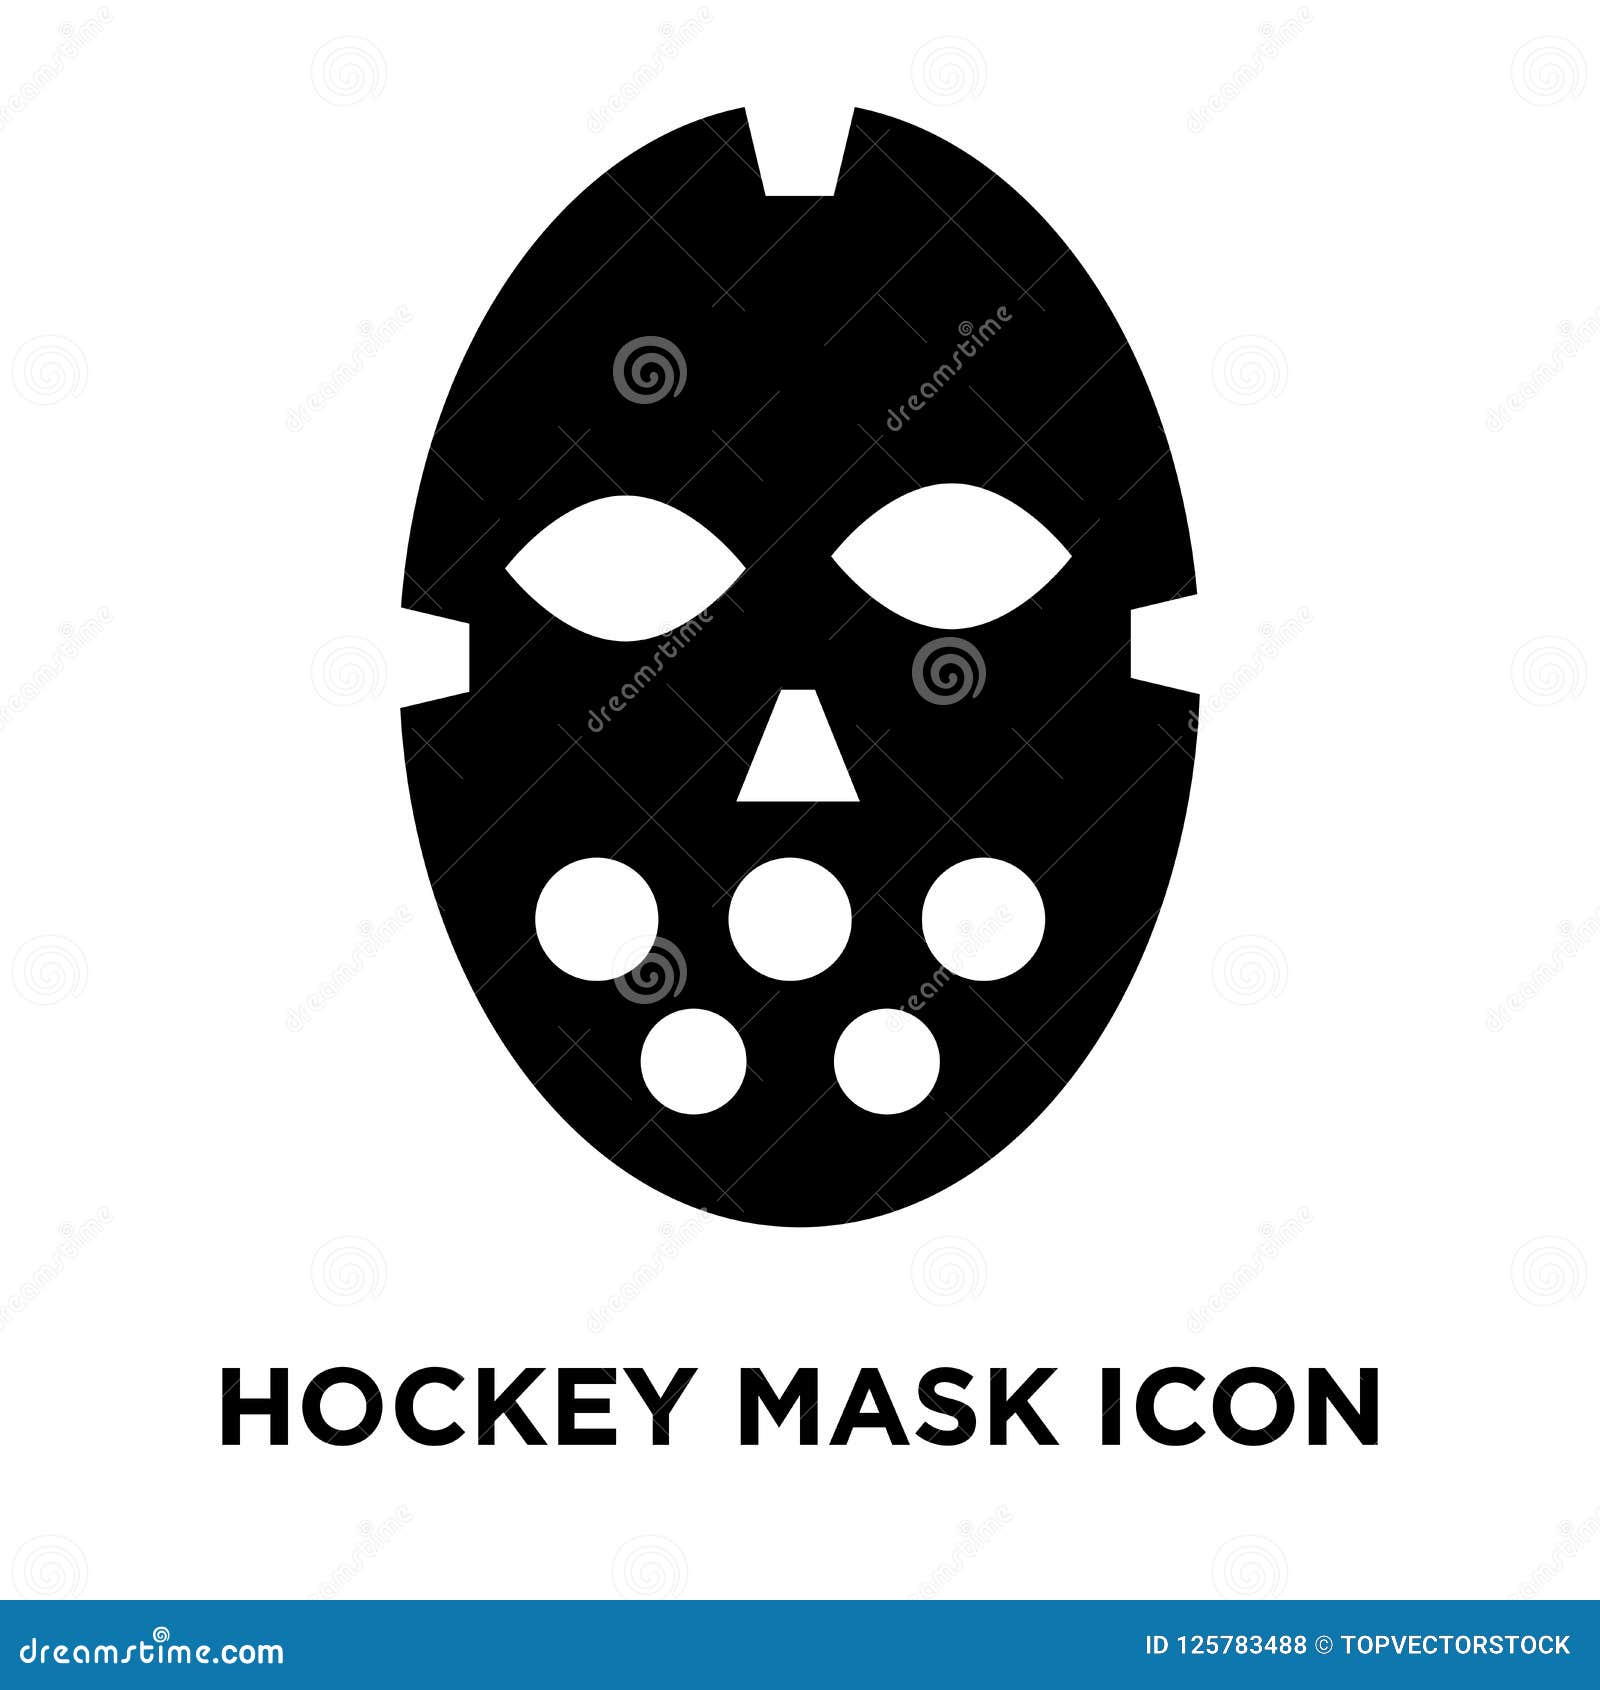 Outline hockey mask icon isolated black simple Vector Image